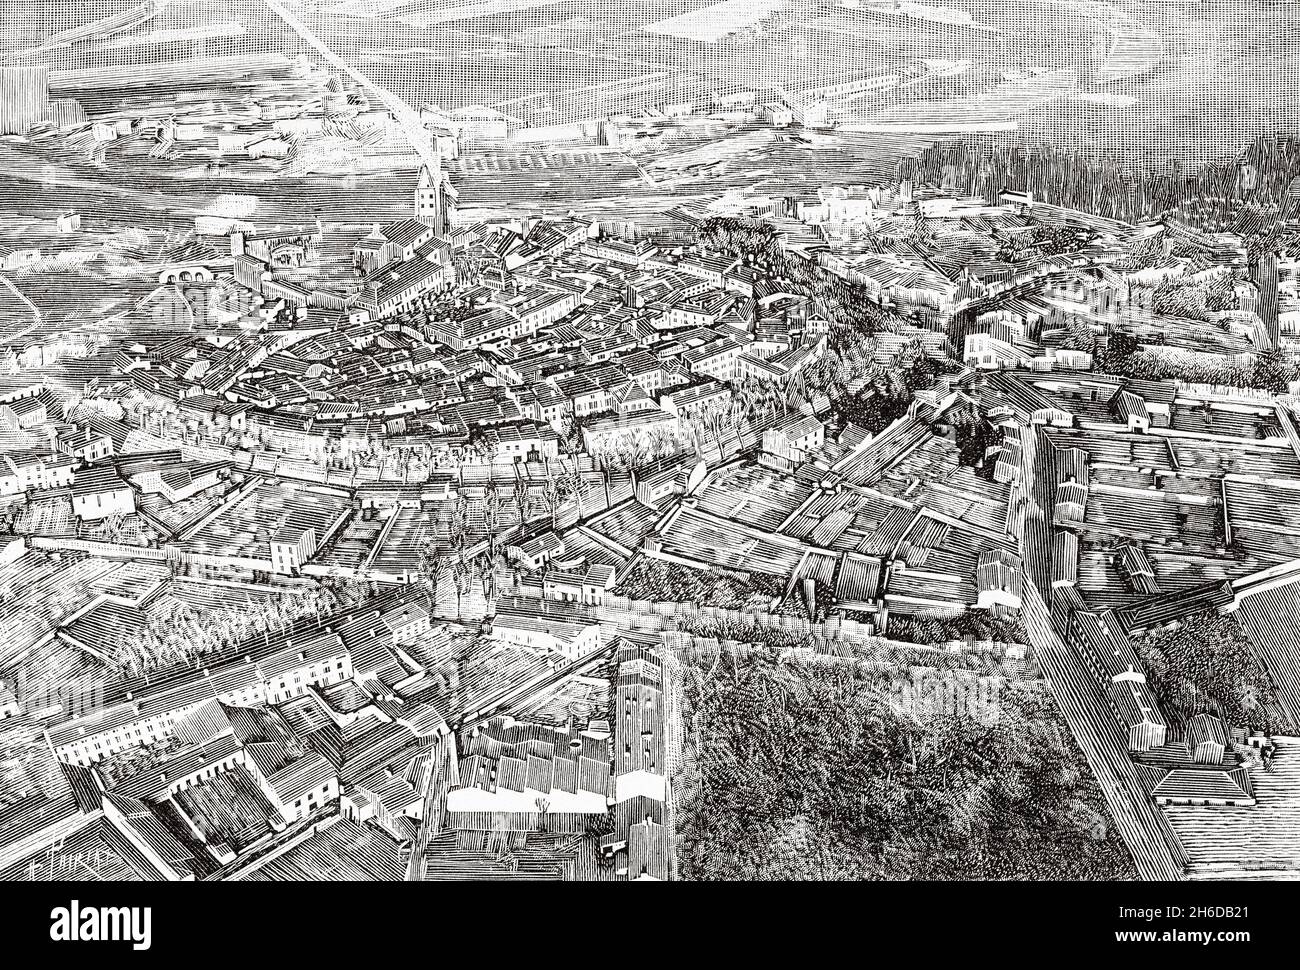 Aerial photography by kite. View taken from the town of Labruguiere, Tarn. France, Europe. Old 19th century engraved illustration from La Nature 1897 Stock Photo